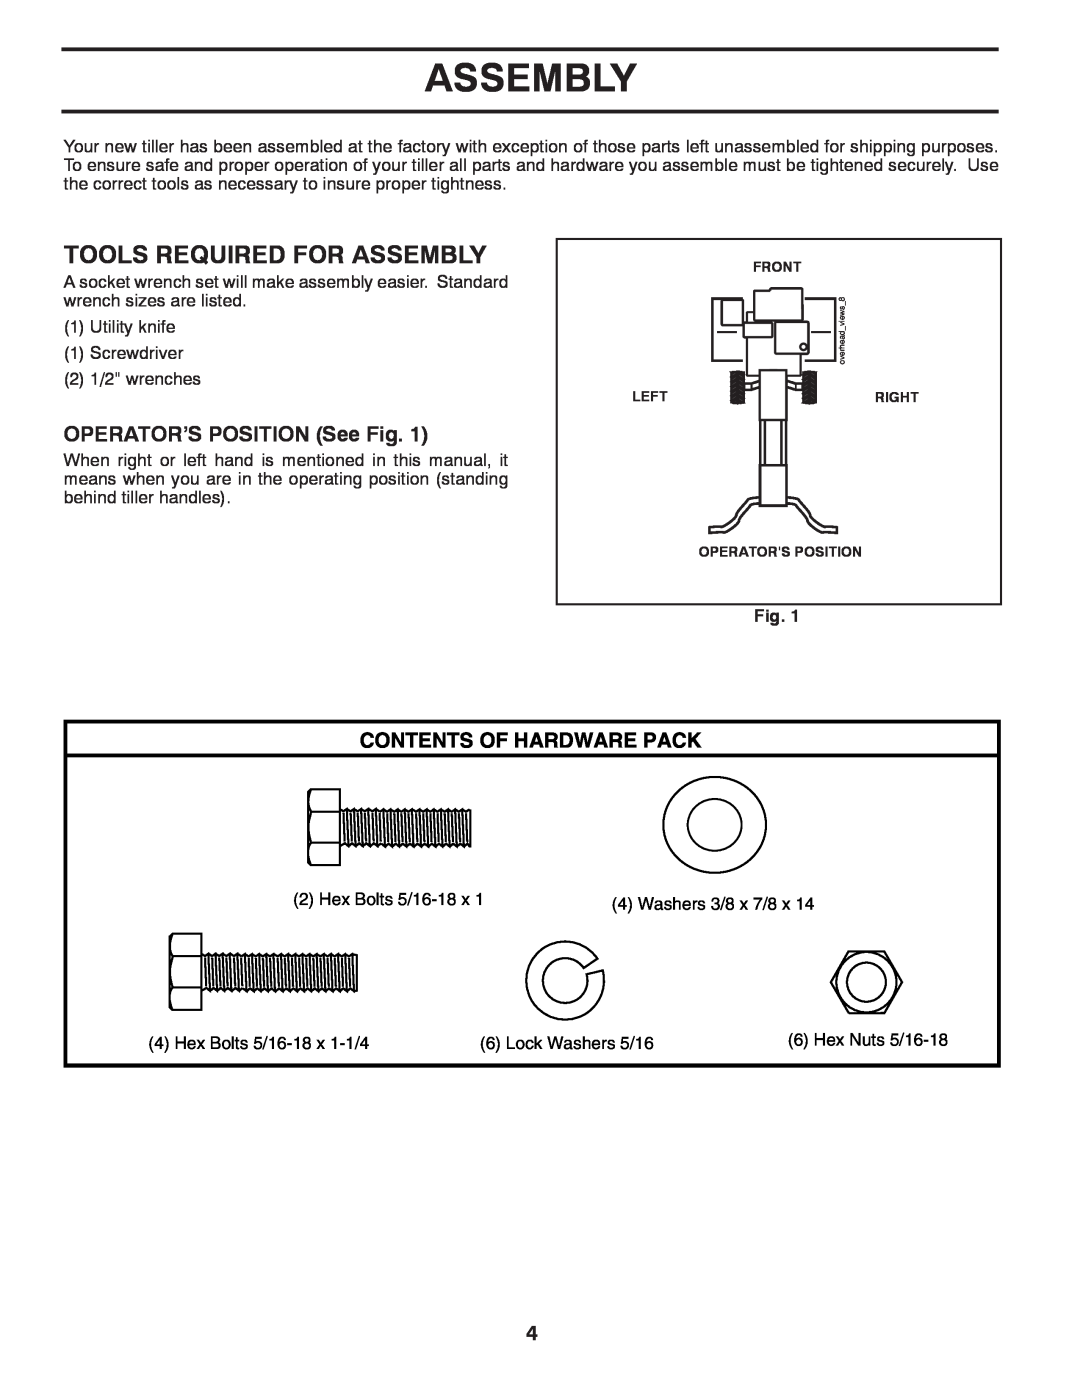 McCulloch 532 43 36-95, MHDF800 Tools Required For Assembly, OPERATOR’S POSITION See Fig, Contents Of Hardware Pack 